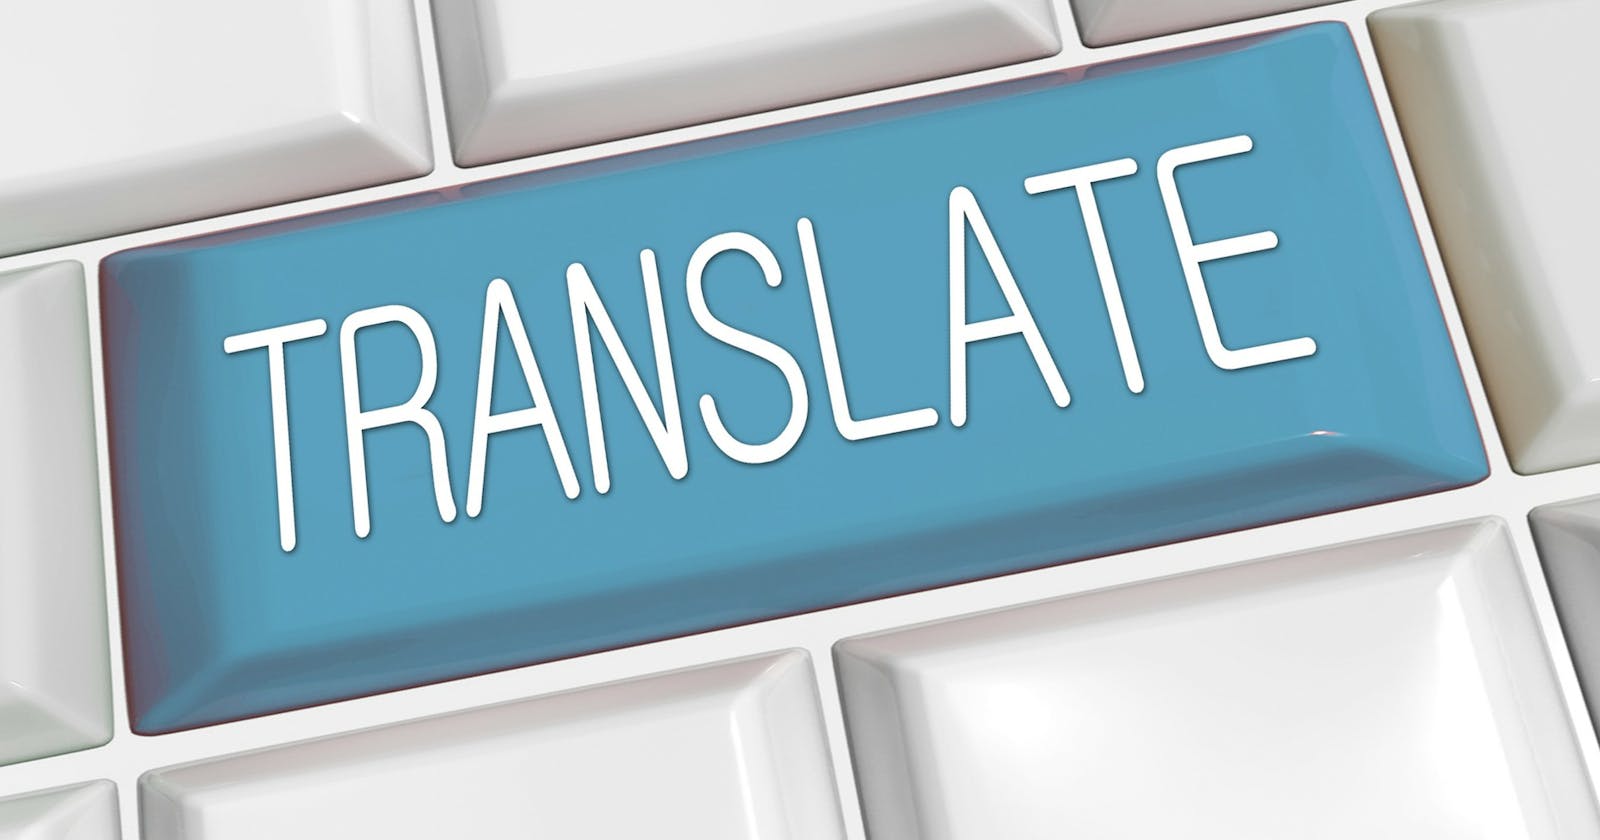 How to do language translation in Python